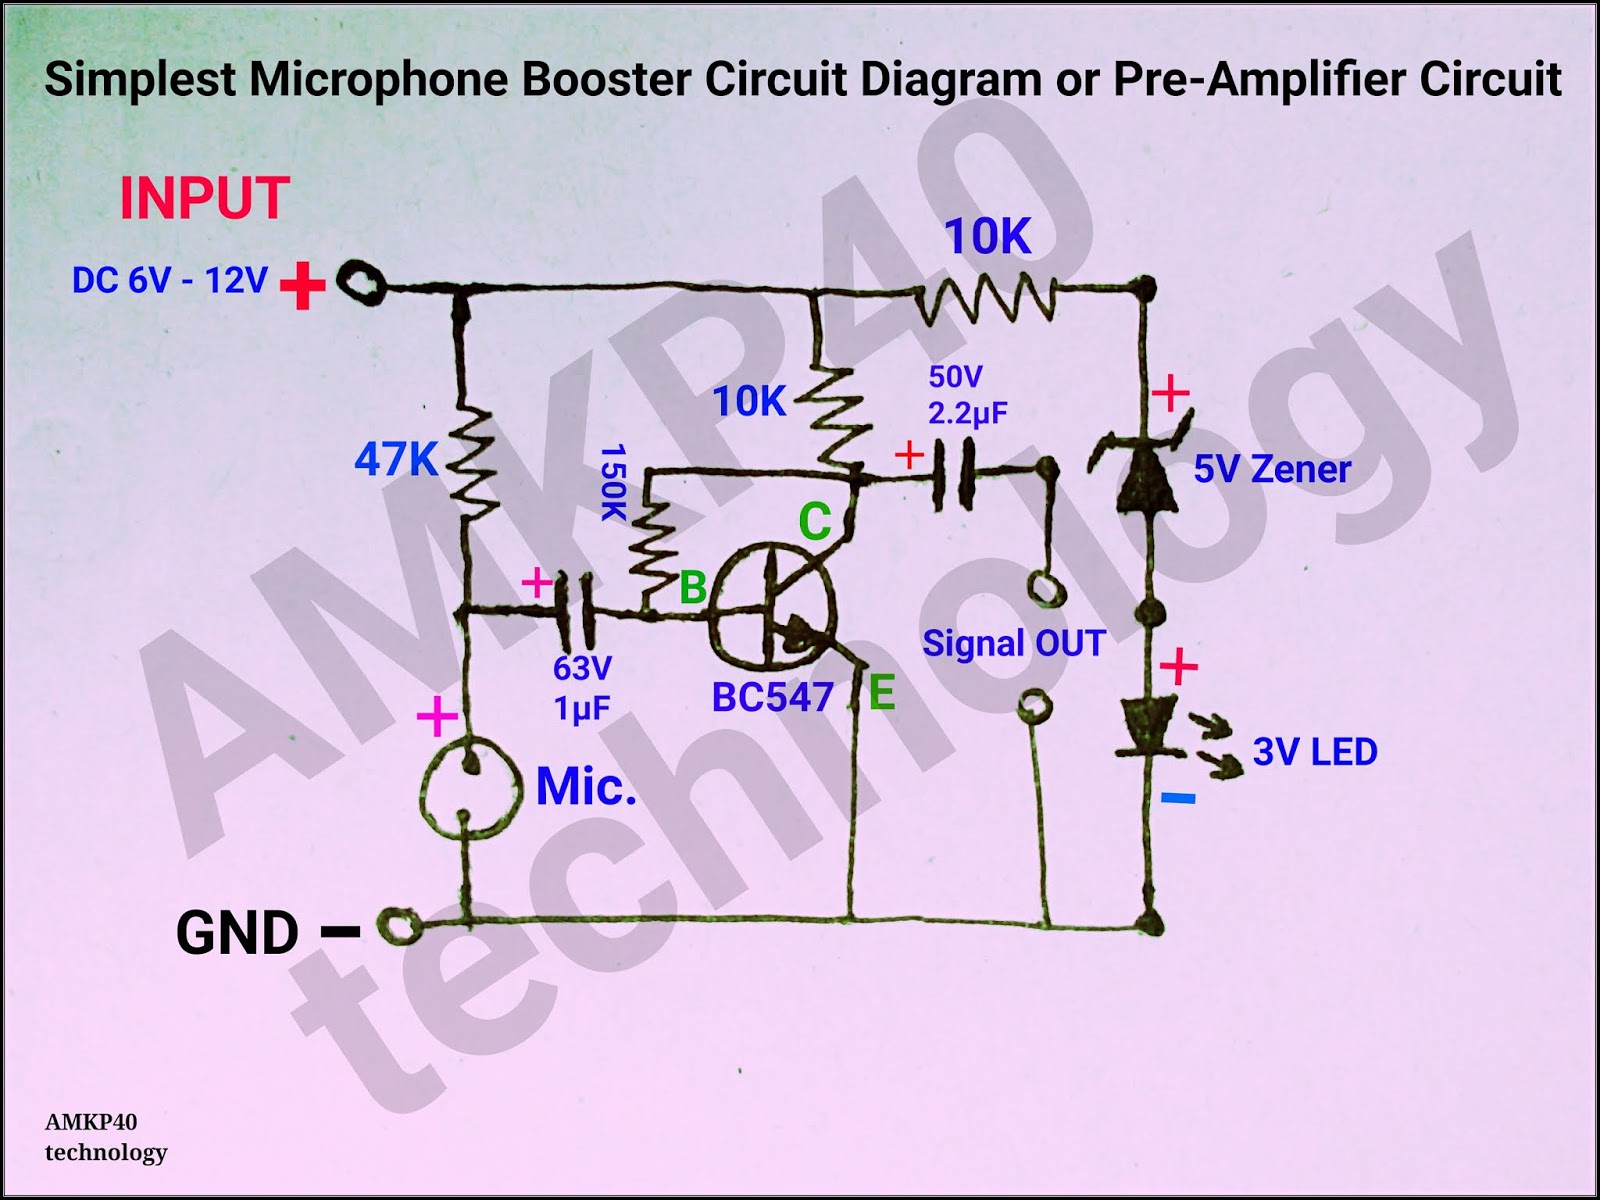 Simplest Microphone Booster Circuit or Pre-Amplifier Circuit Diagram